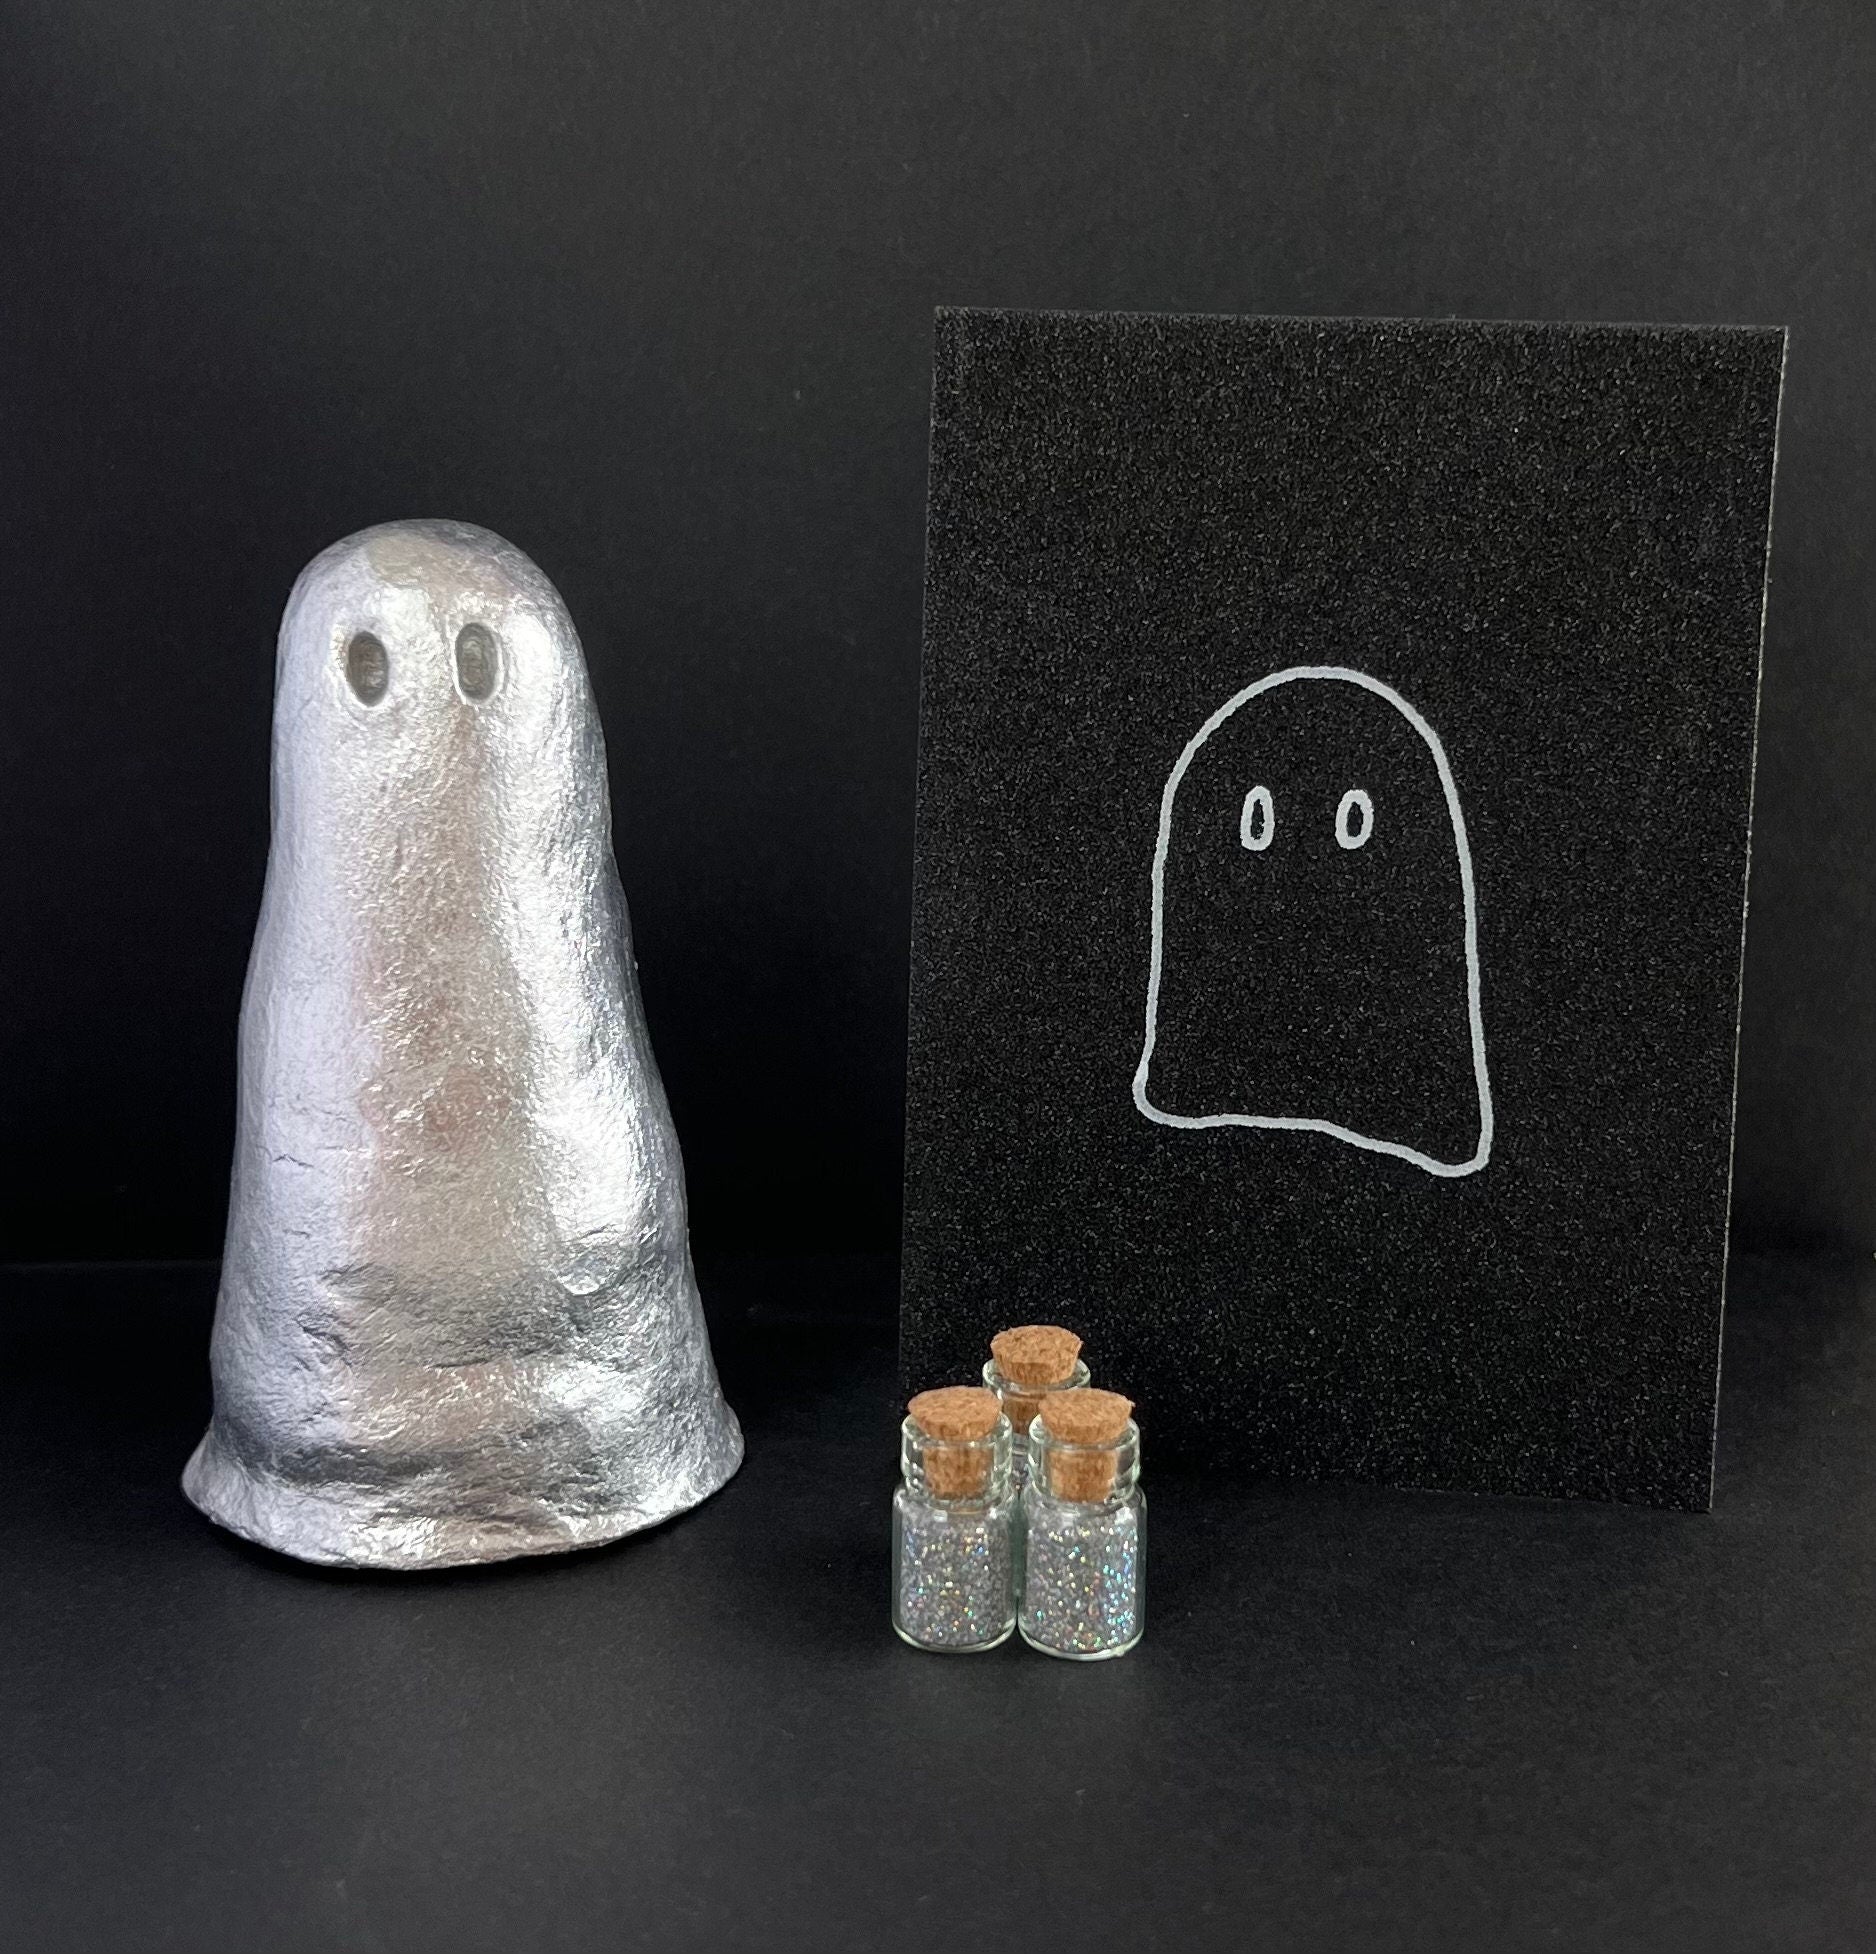 Beccas Ghosties | Ghost Figures | Halloween Decor | Ghost Friend | Silver Ghost | Clay Ghost